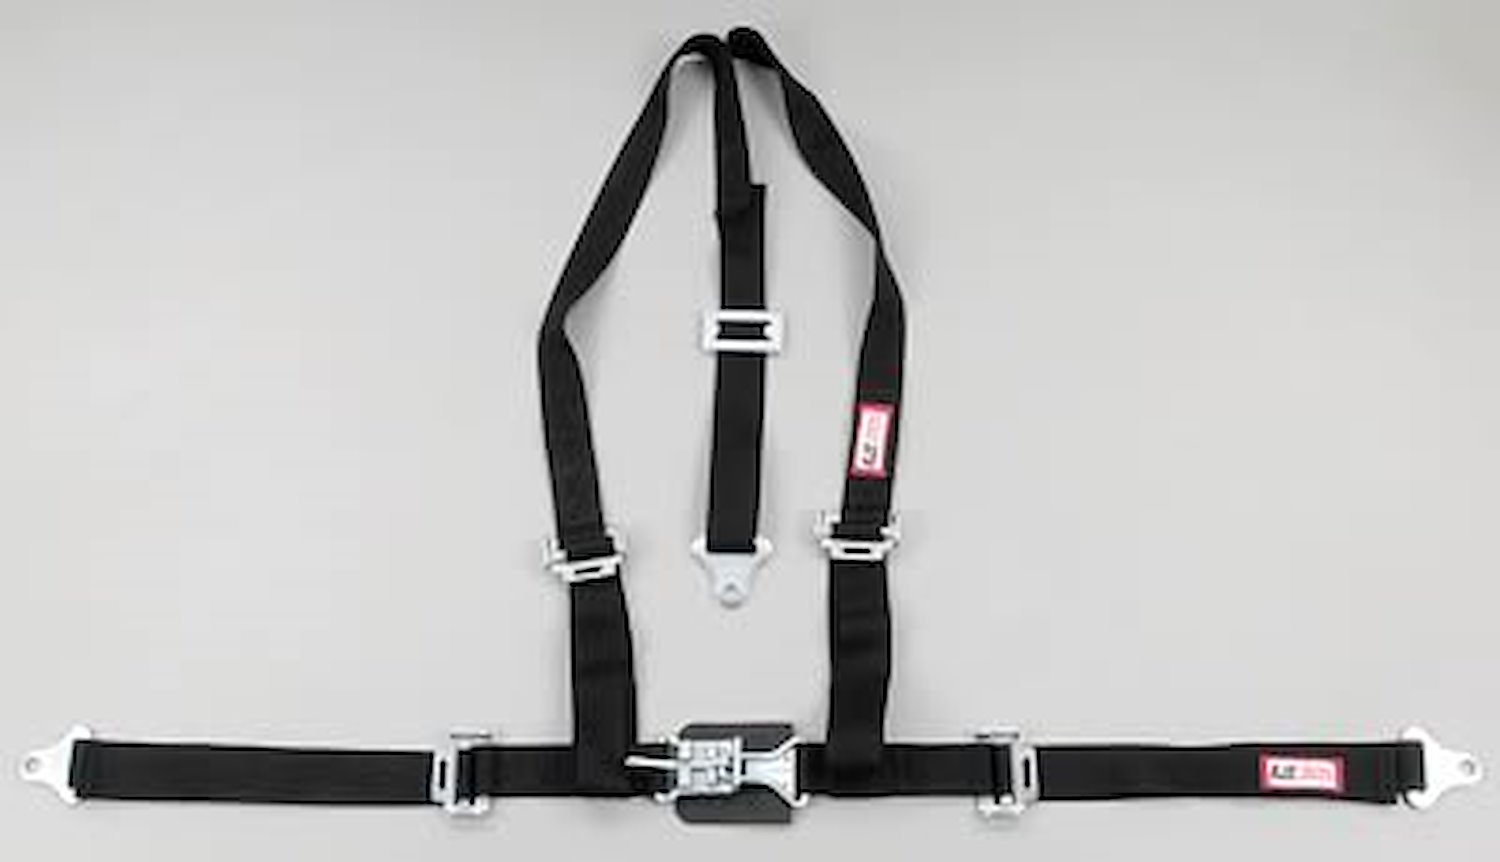 NON-SFI L&L HARNESS 3 PULL DOWN Lap BELT SNAP SEWN IN 2 S.H. Y FLOOR Mount WRAP/BOLT RED